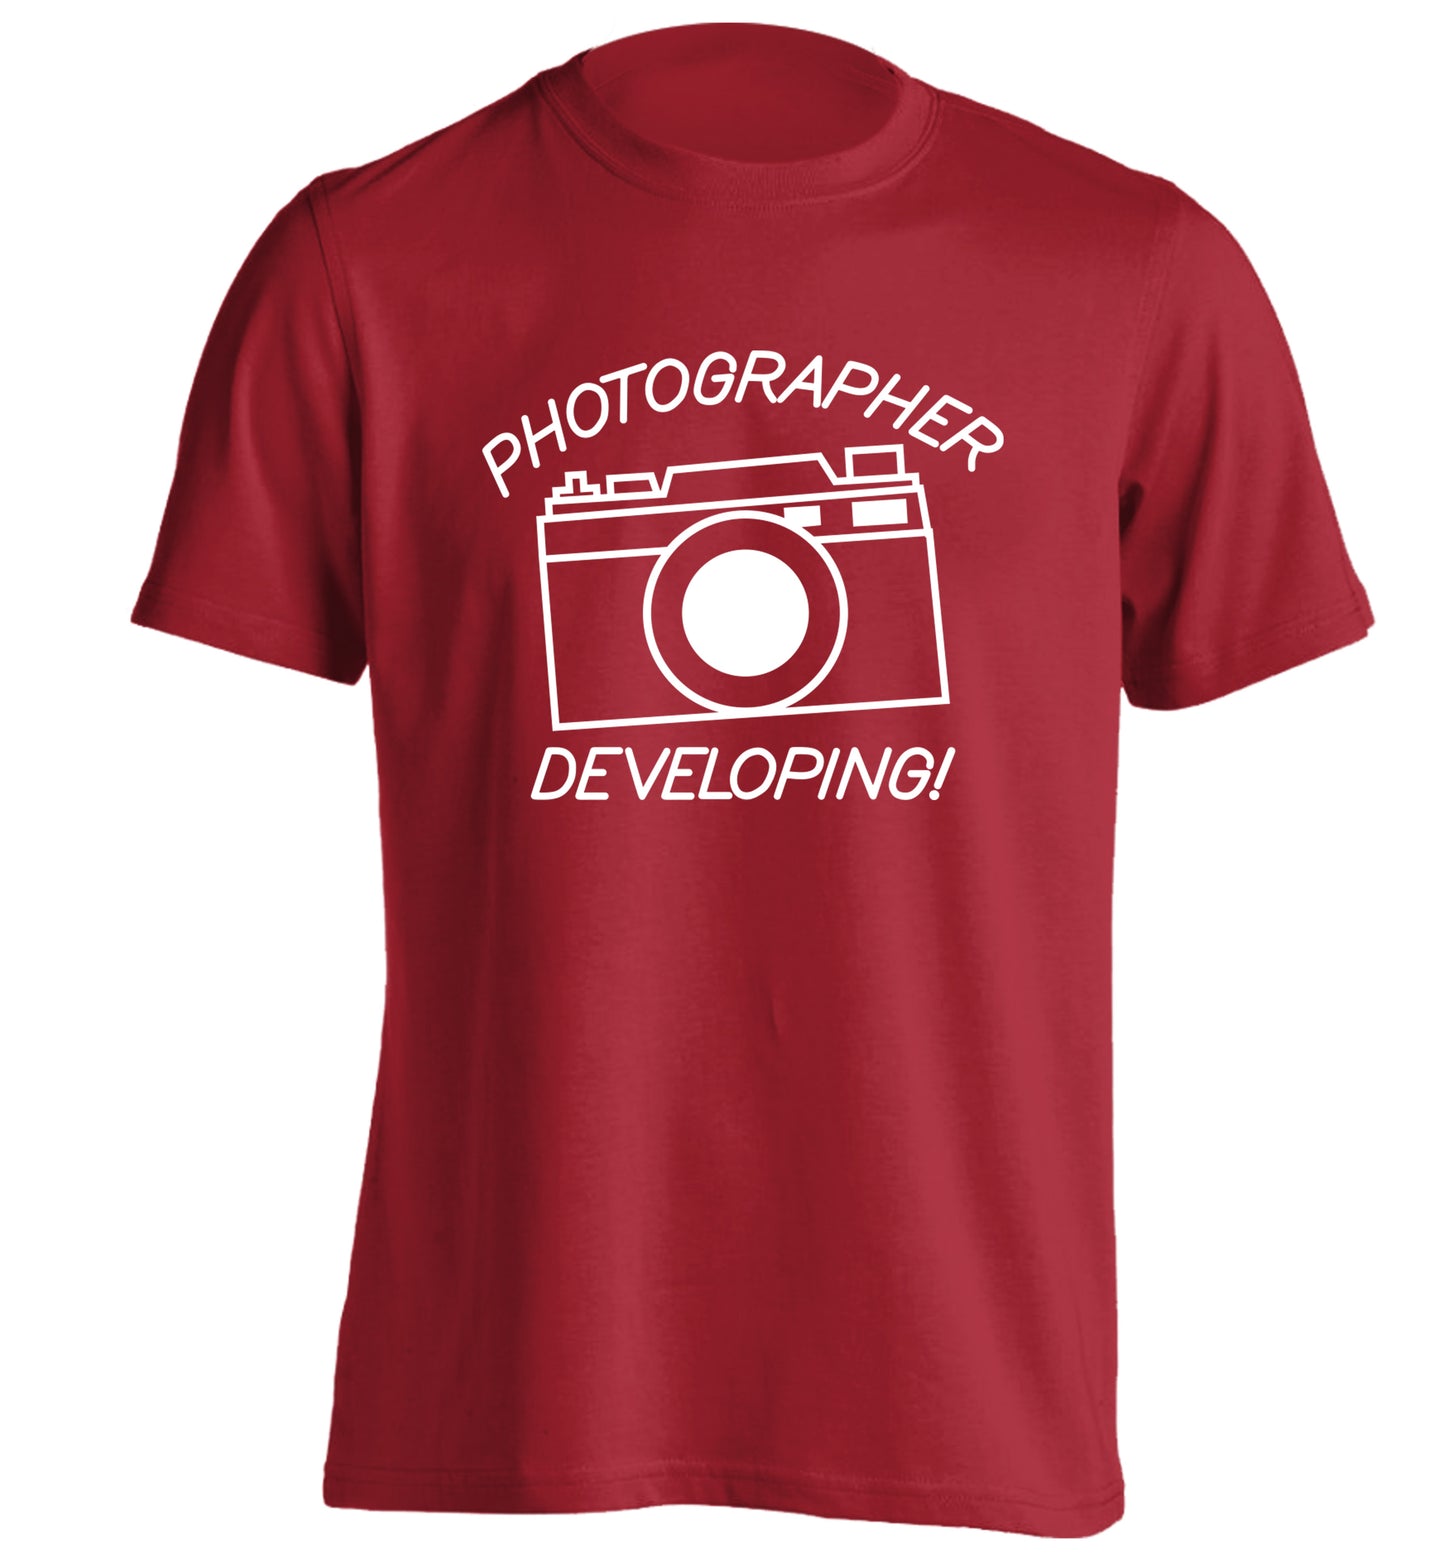 Photographer Developing  adults unisex red Tshirt 2XL